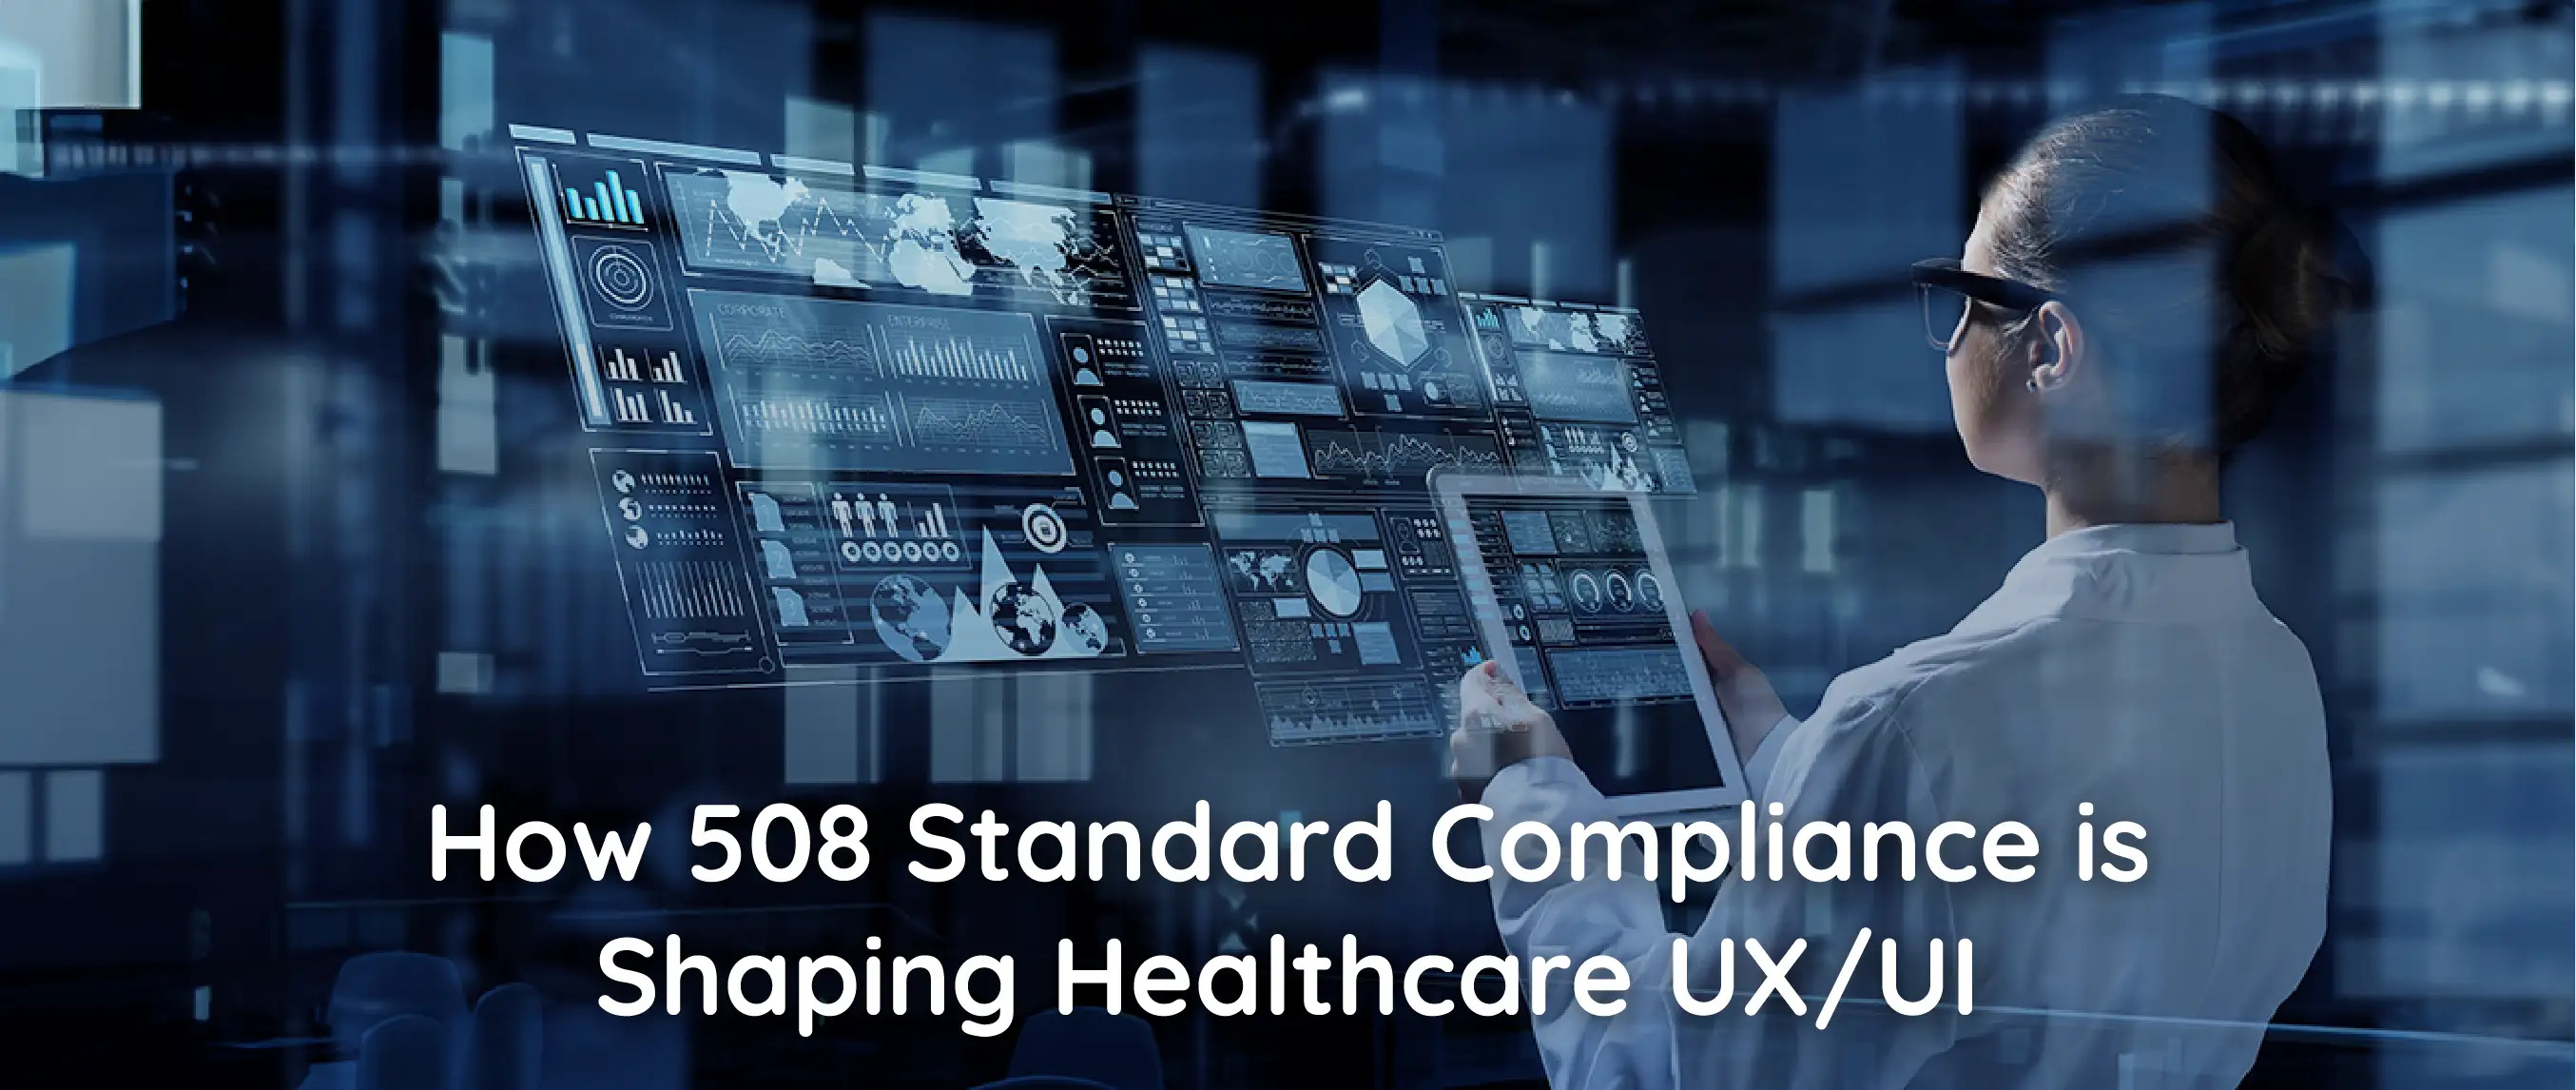 How 508 Standard Compliance is Shaping Healthcare UI/UX